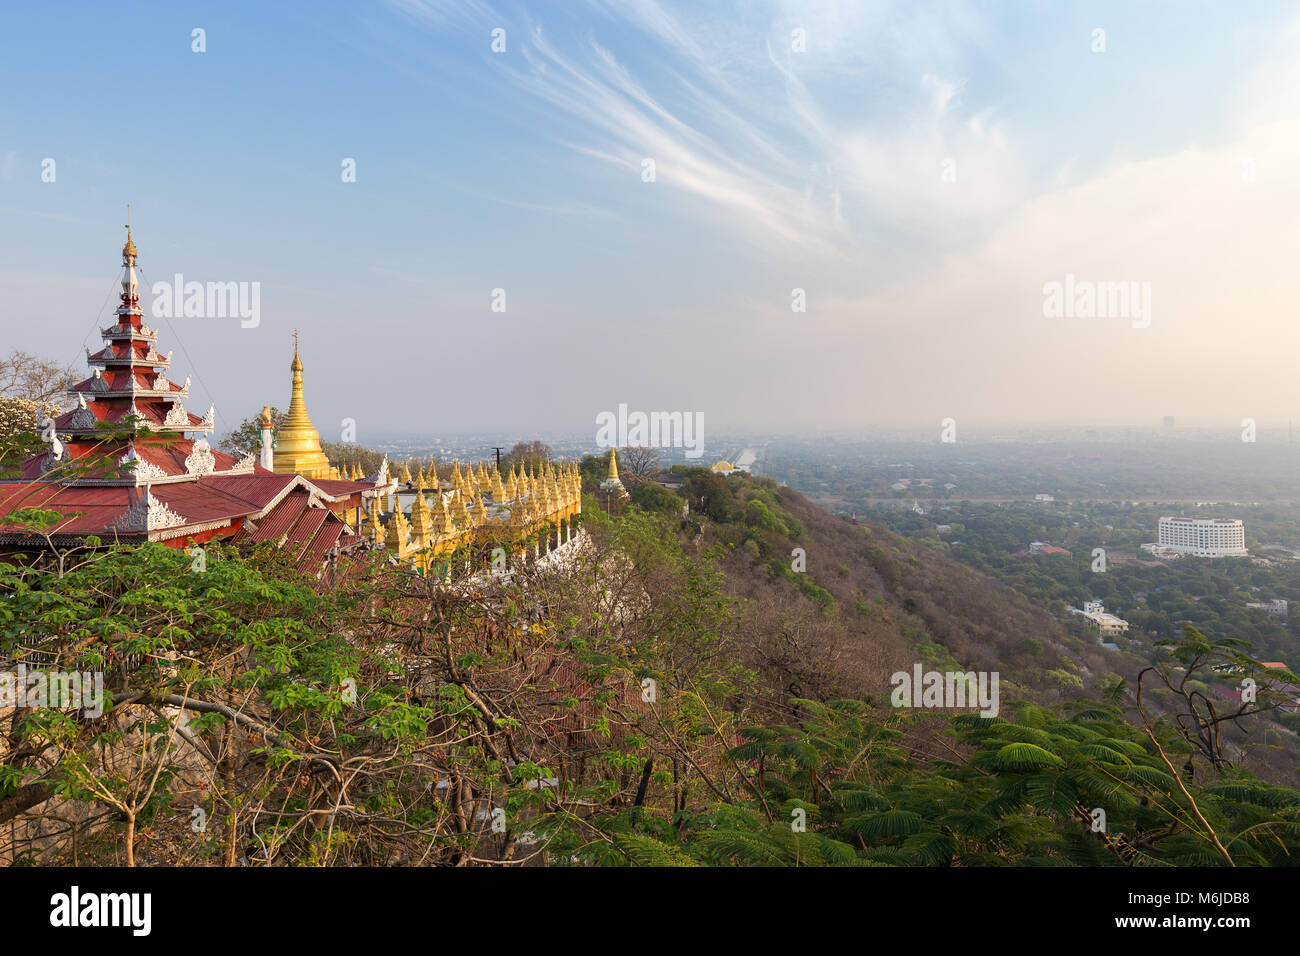 Panoramic view of pavilions and golden pagodas at the Mandalay Hill and the city below in Mandalay, Myanmar (Burma) on a sunny day. Stock Photo